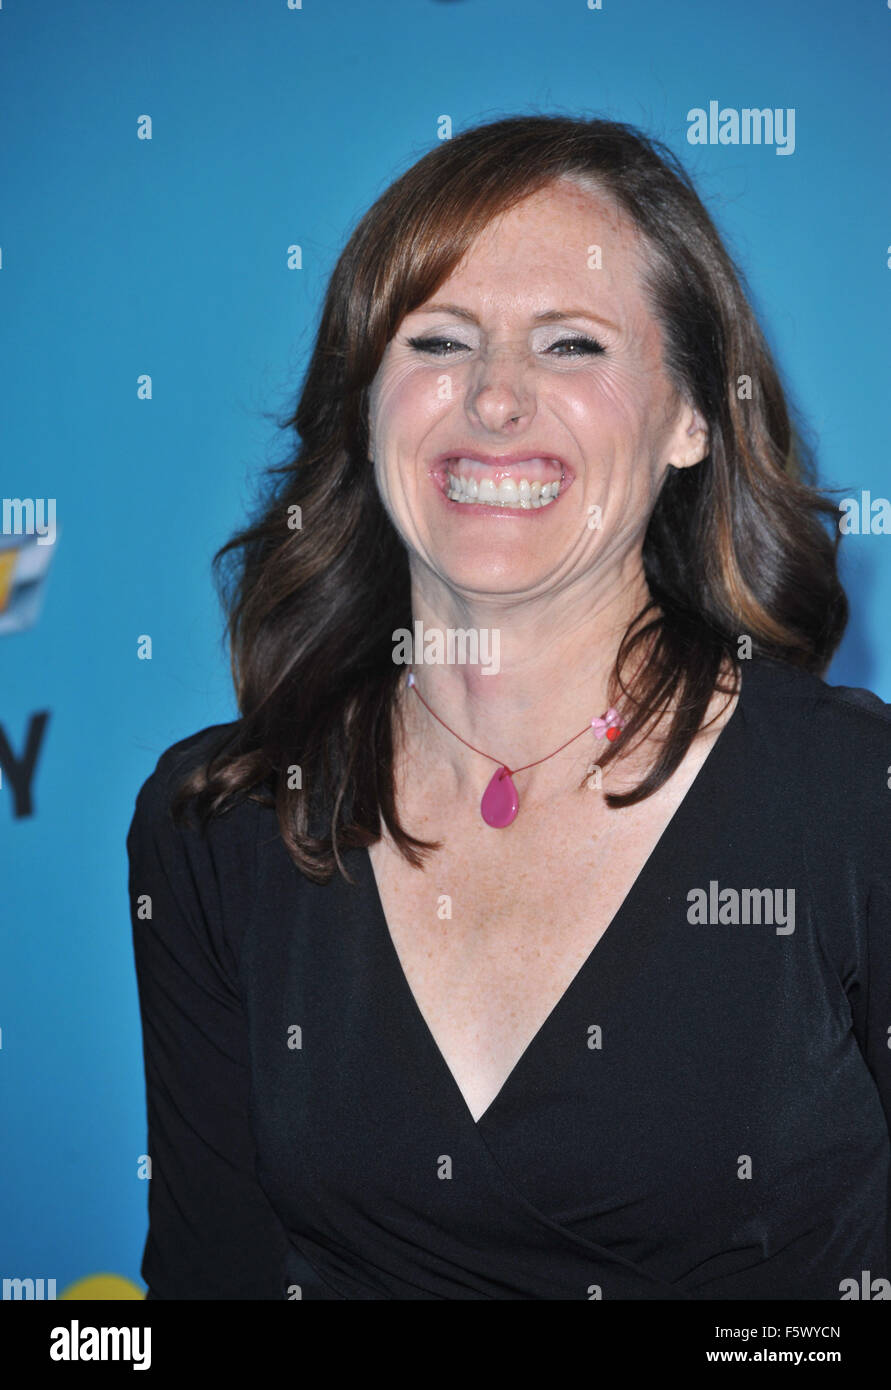 LOS ANGELES, CA - APRIL 12, 2010: Molly Shannon at the "Glee" spring series  premiere party at Chateau Marmont, West Hollywood Stock Photo - Alamy